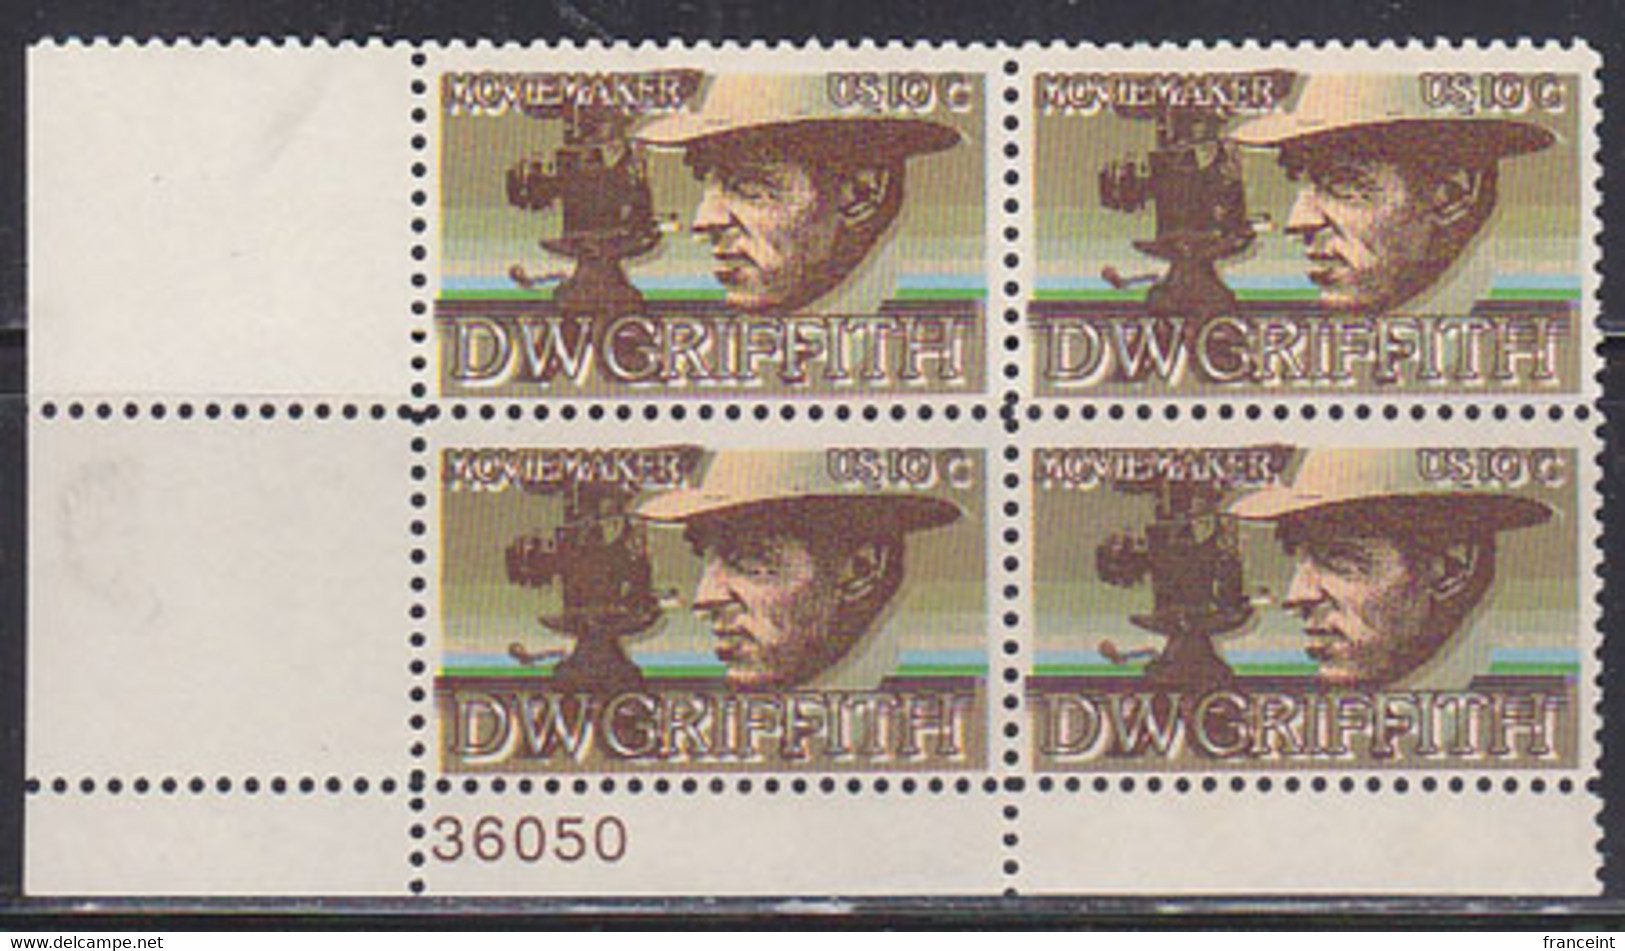 U.S.A. (1975)  D.W. Griffith. Camera. Shift Of The Color Dark Brown In A Plate Block Of 4 -> A Double Image. Scott 1555 - Variedades, Errores & Curiosidades